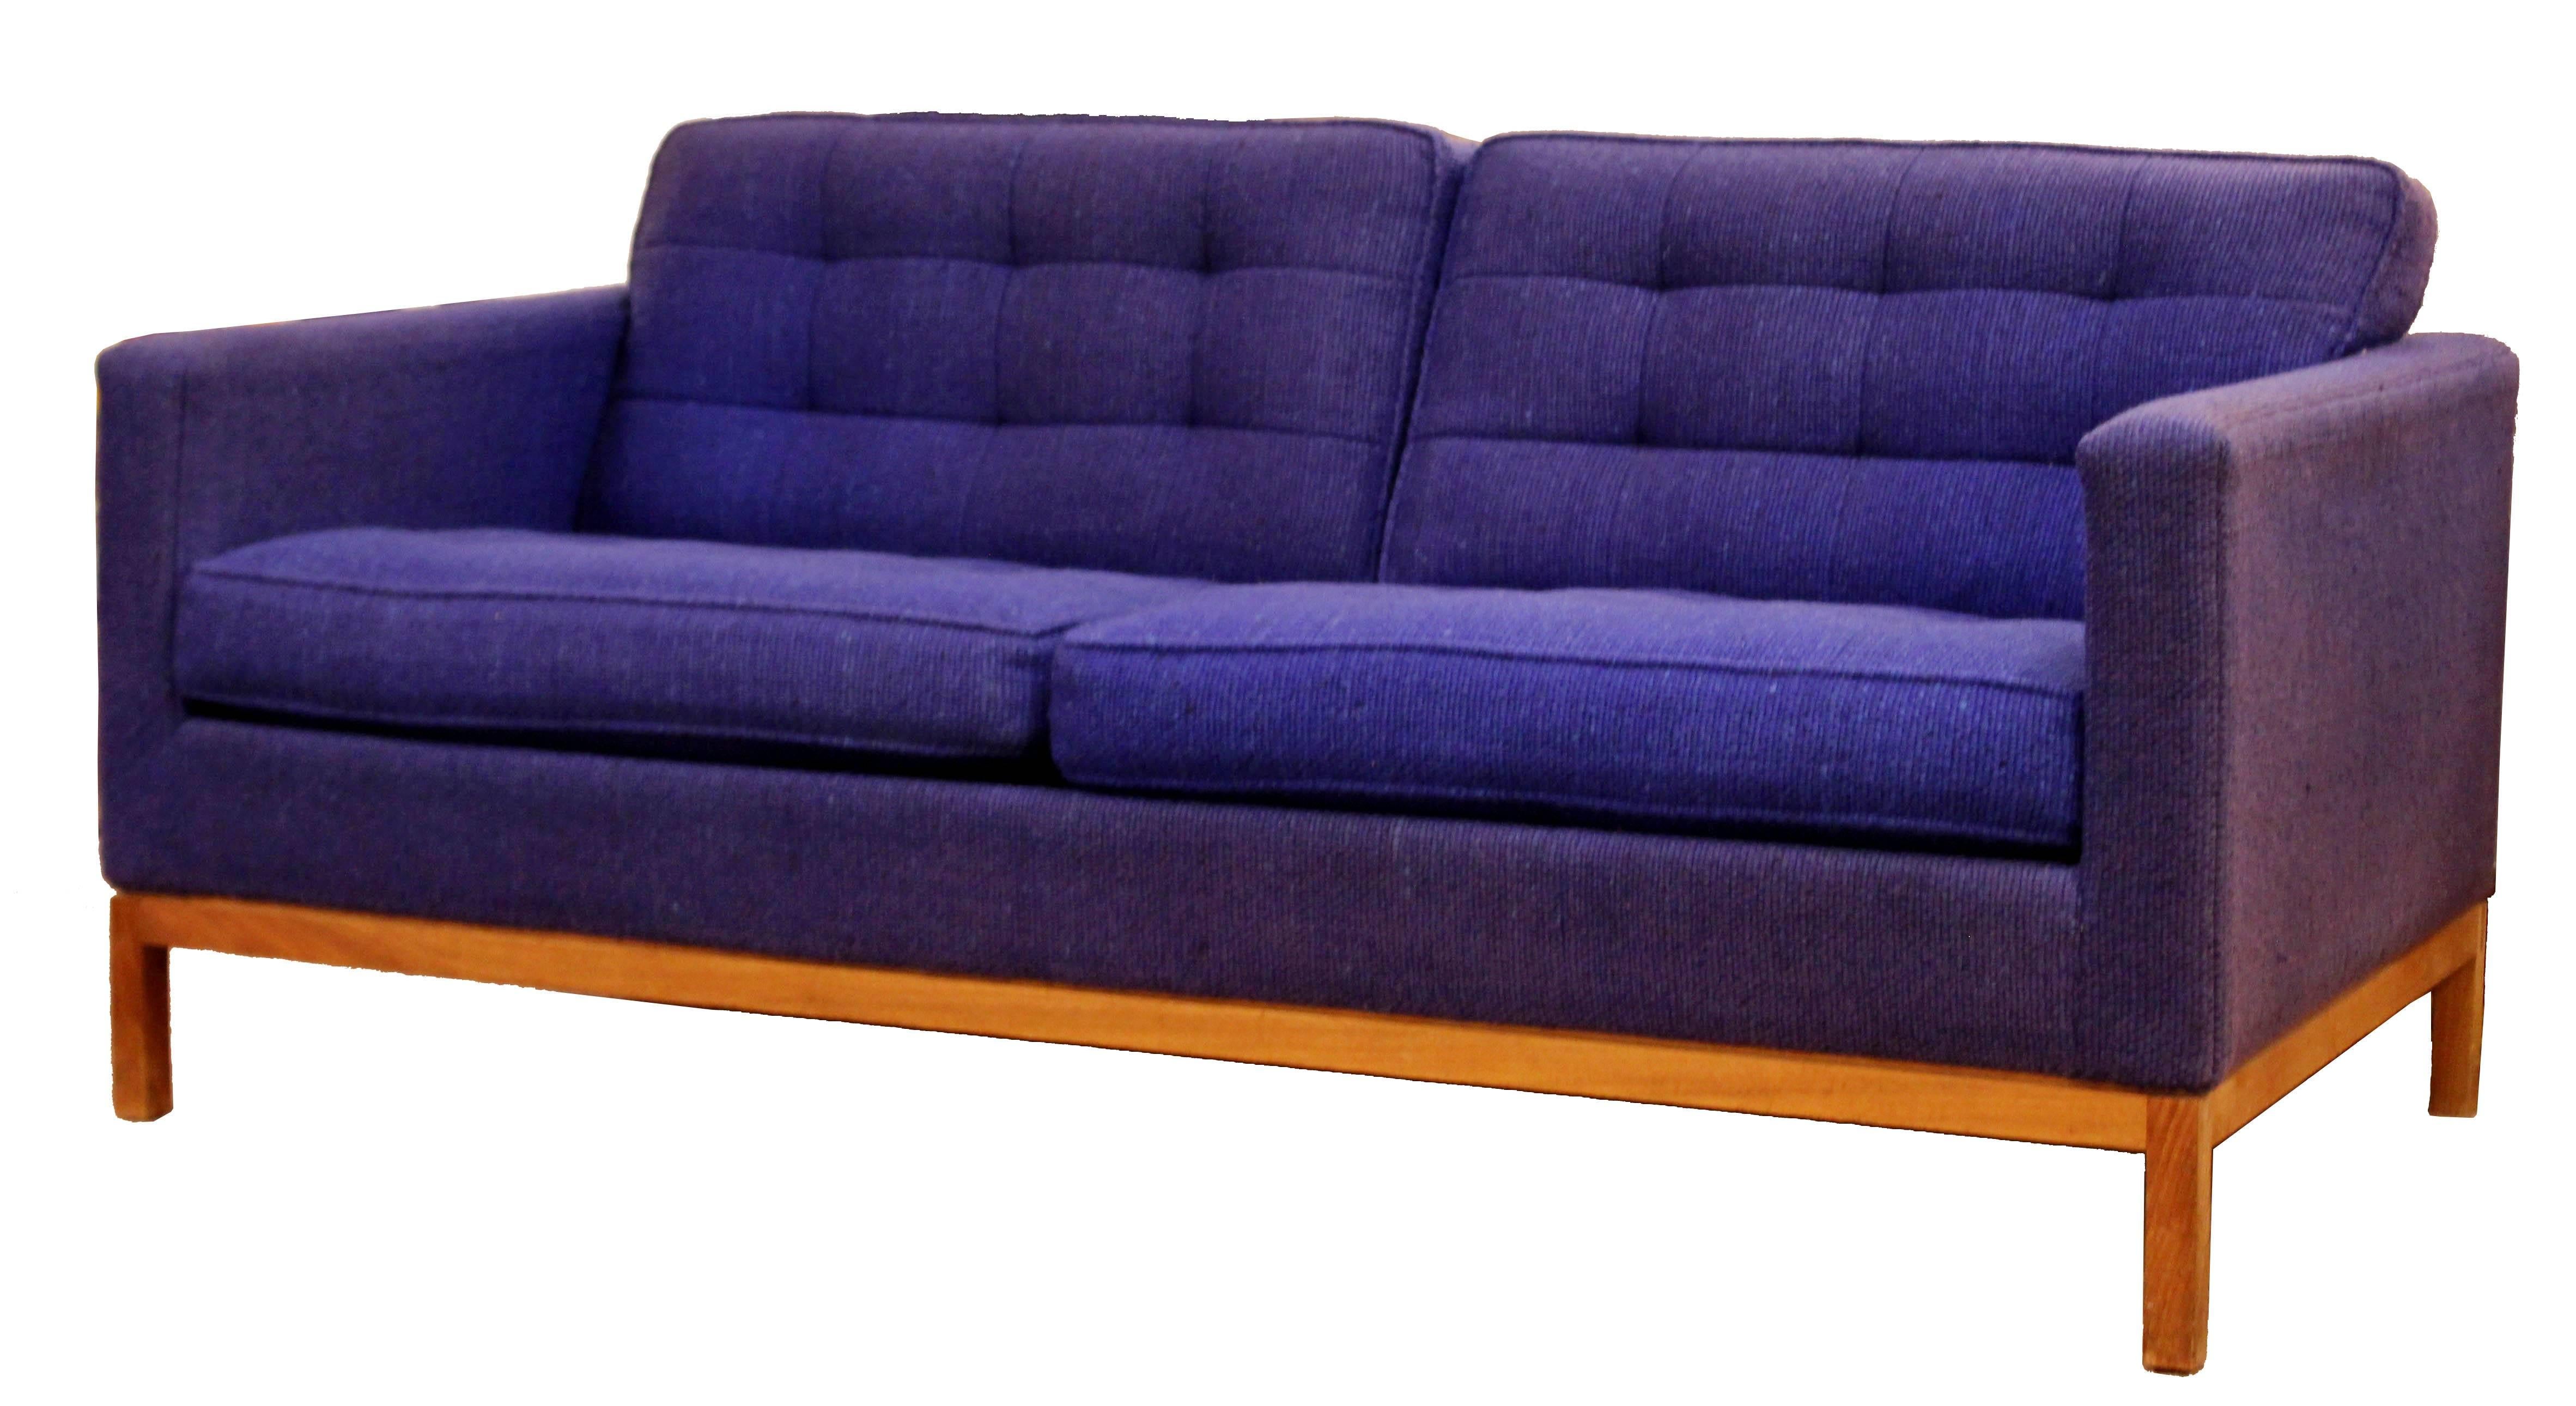 American Mid-Century Modern Florence Knoll Pair of Tufted Loveseat & Sofa Wood Base 1950s